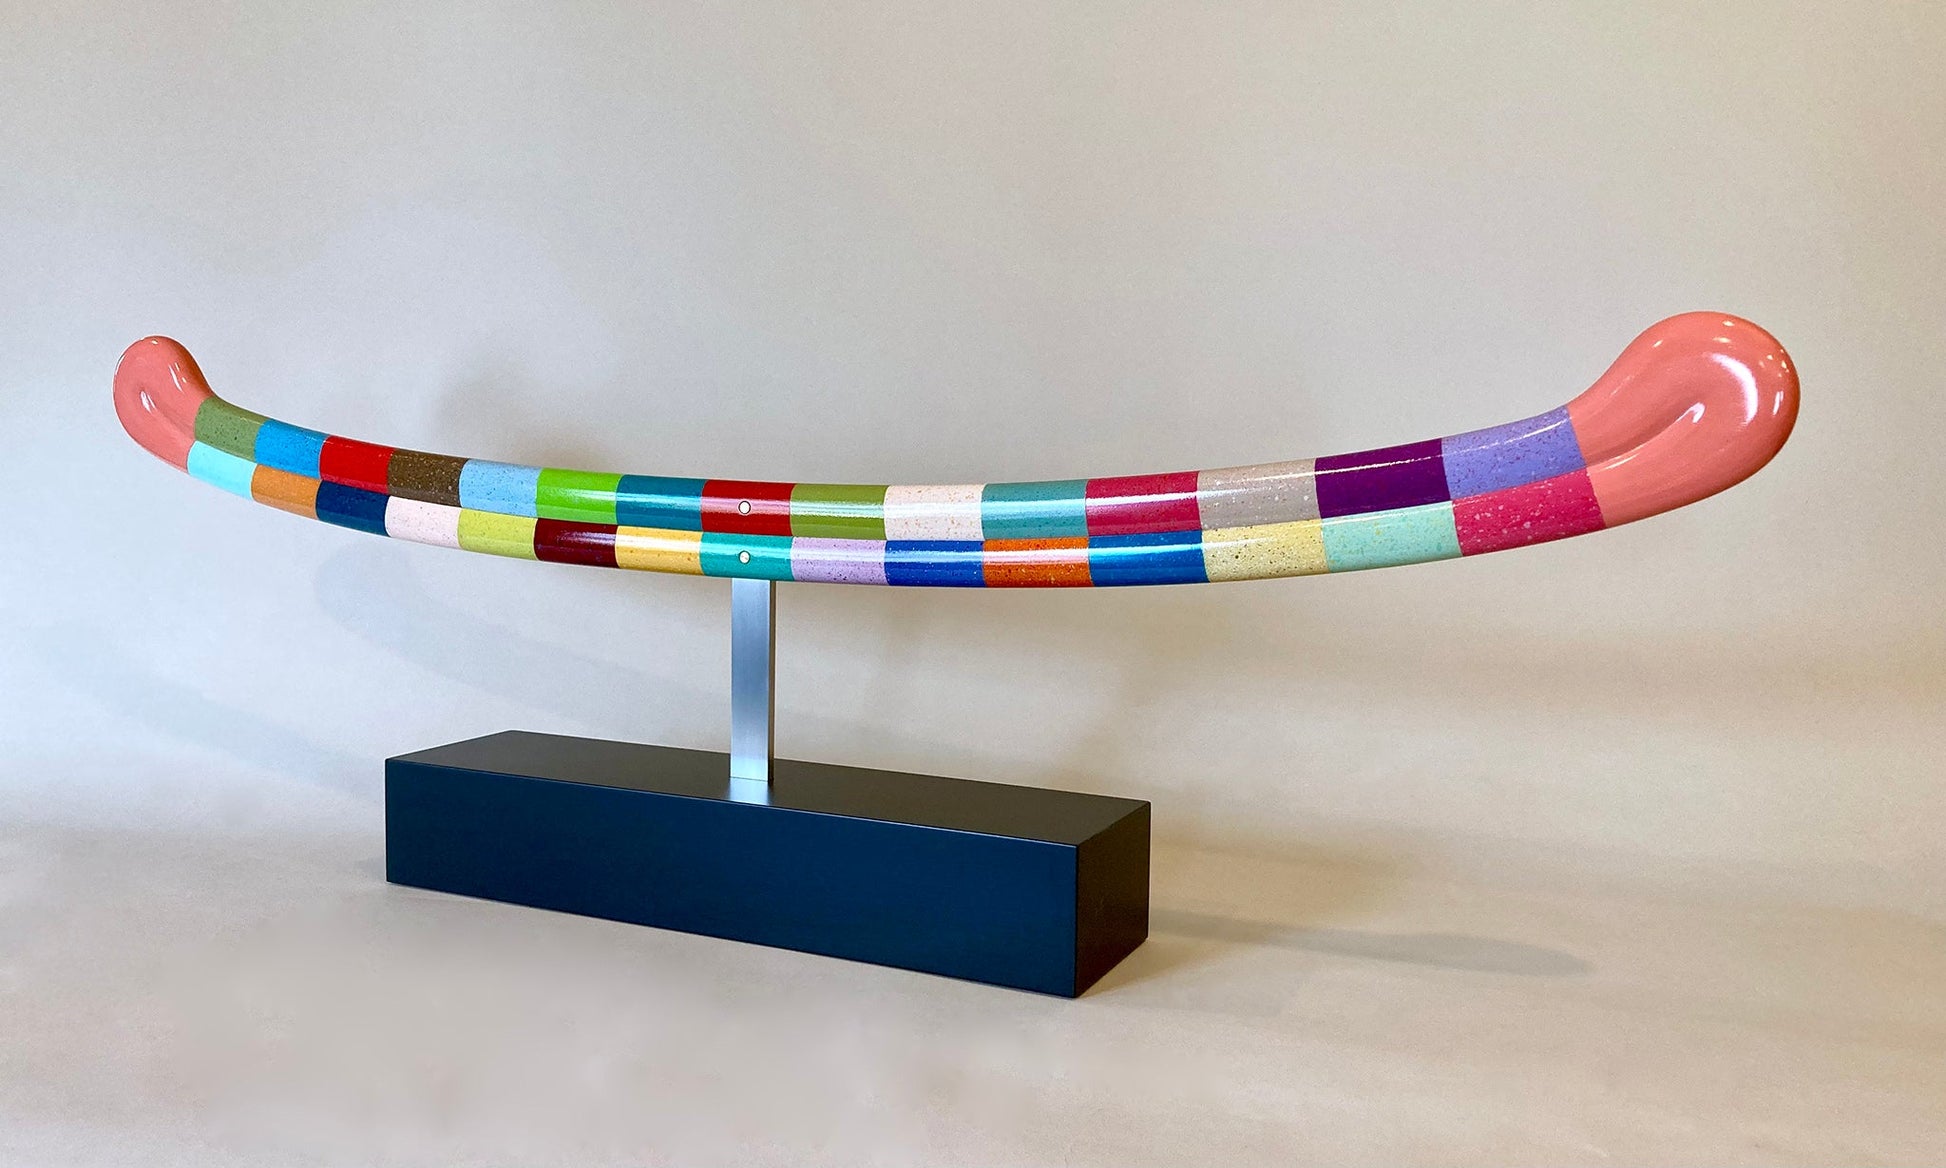 Abstract sculpture depicting a closed mouthed smile. The smile consists of 30 different colors arranged in rectangles along the lips. It is suspended with a silver bar over a black block. 13"x40"x4.25" painted wood by Sean O'Meallie